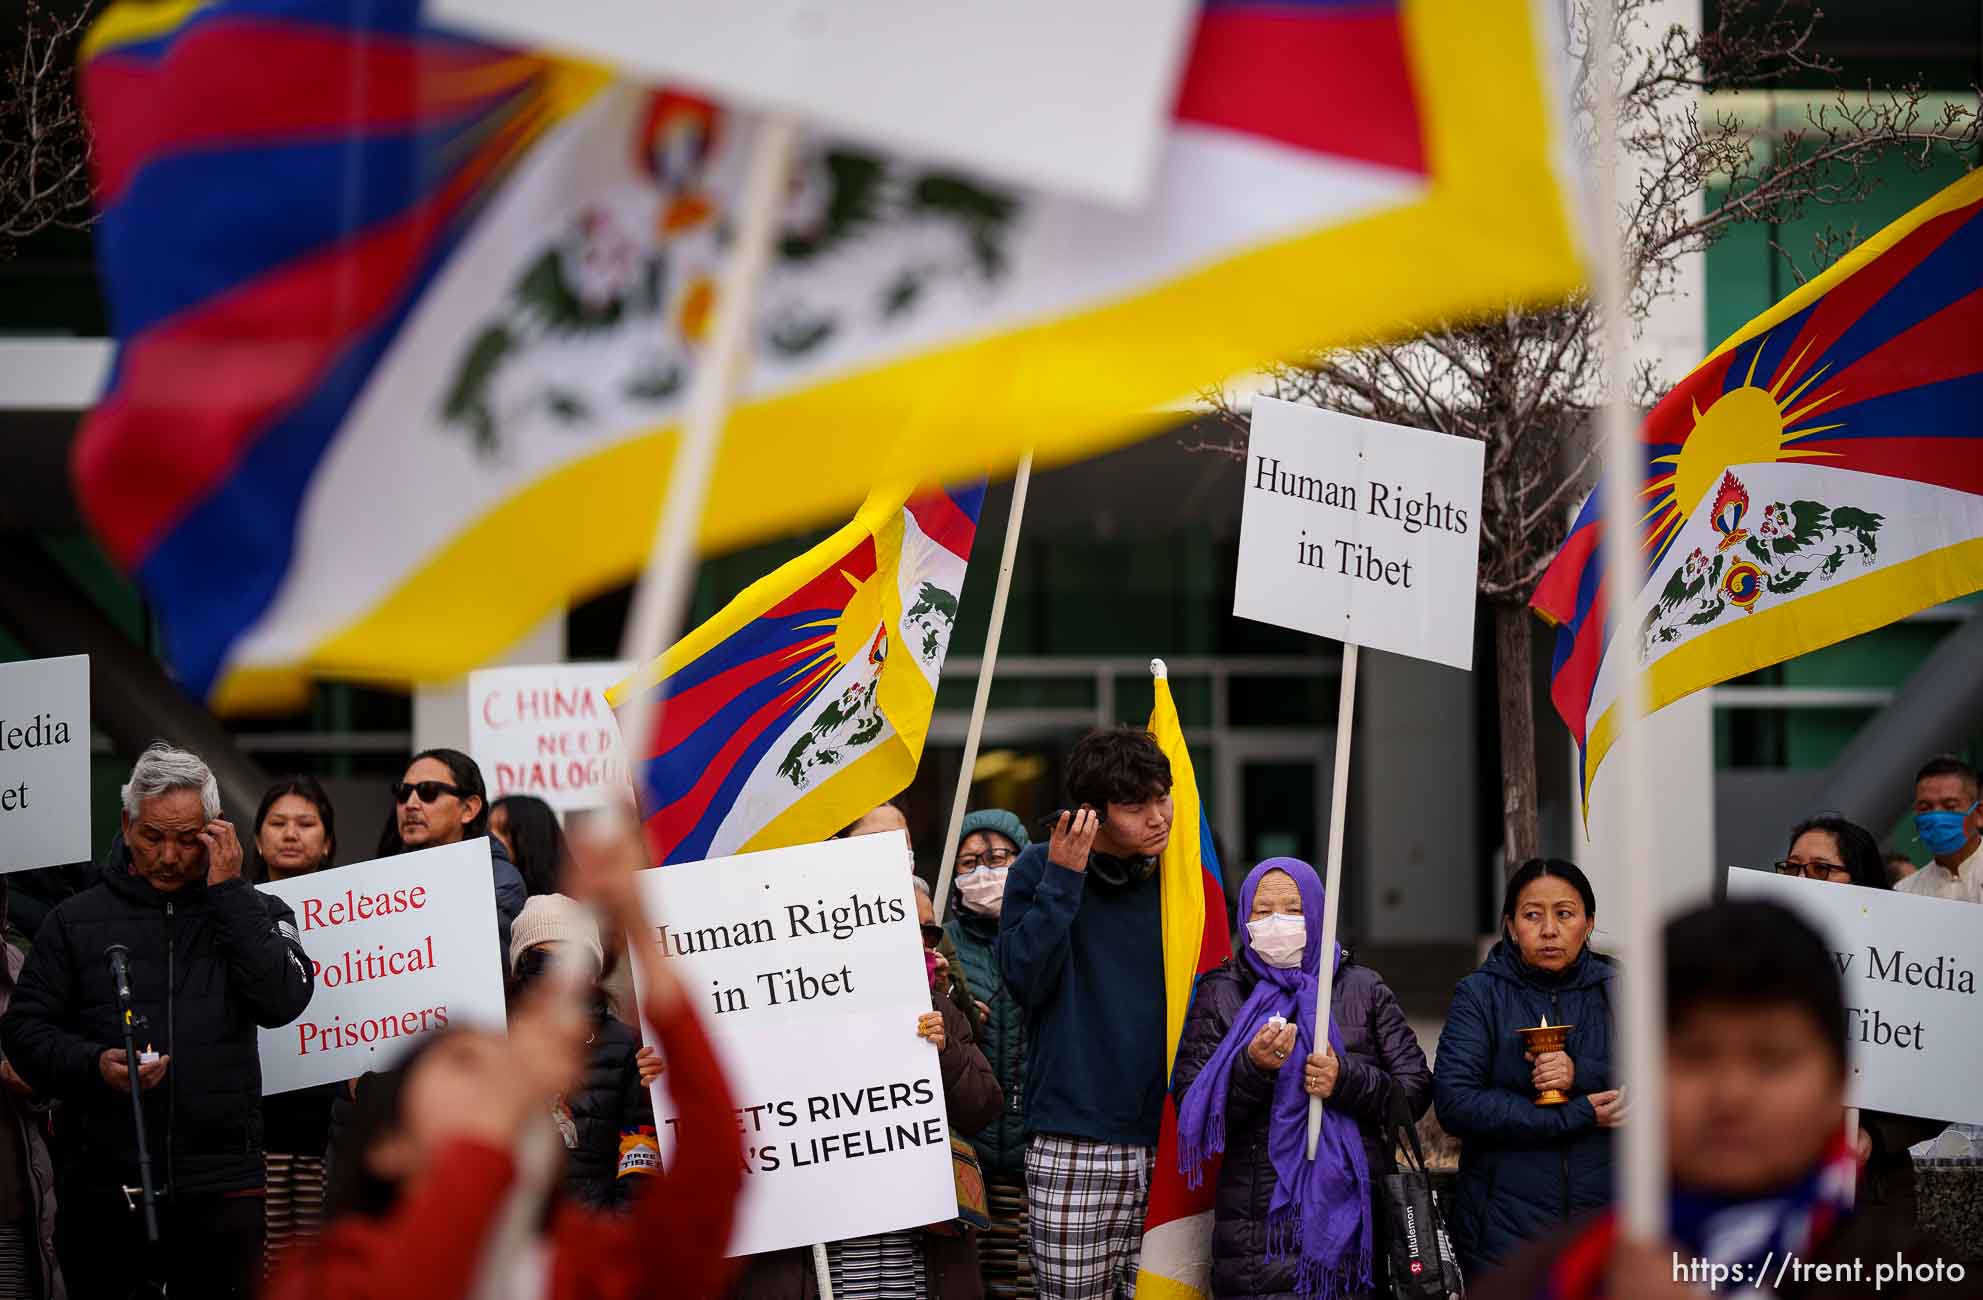 Rally for human rights in Tibet